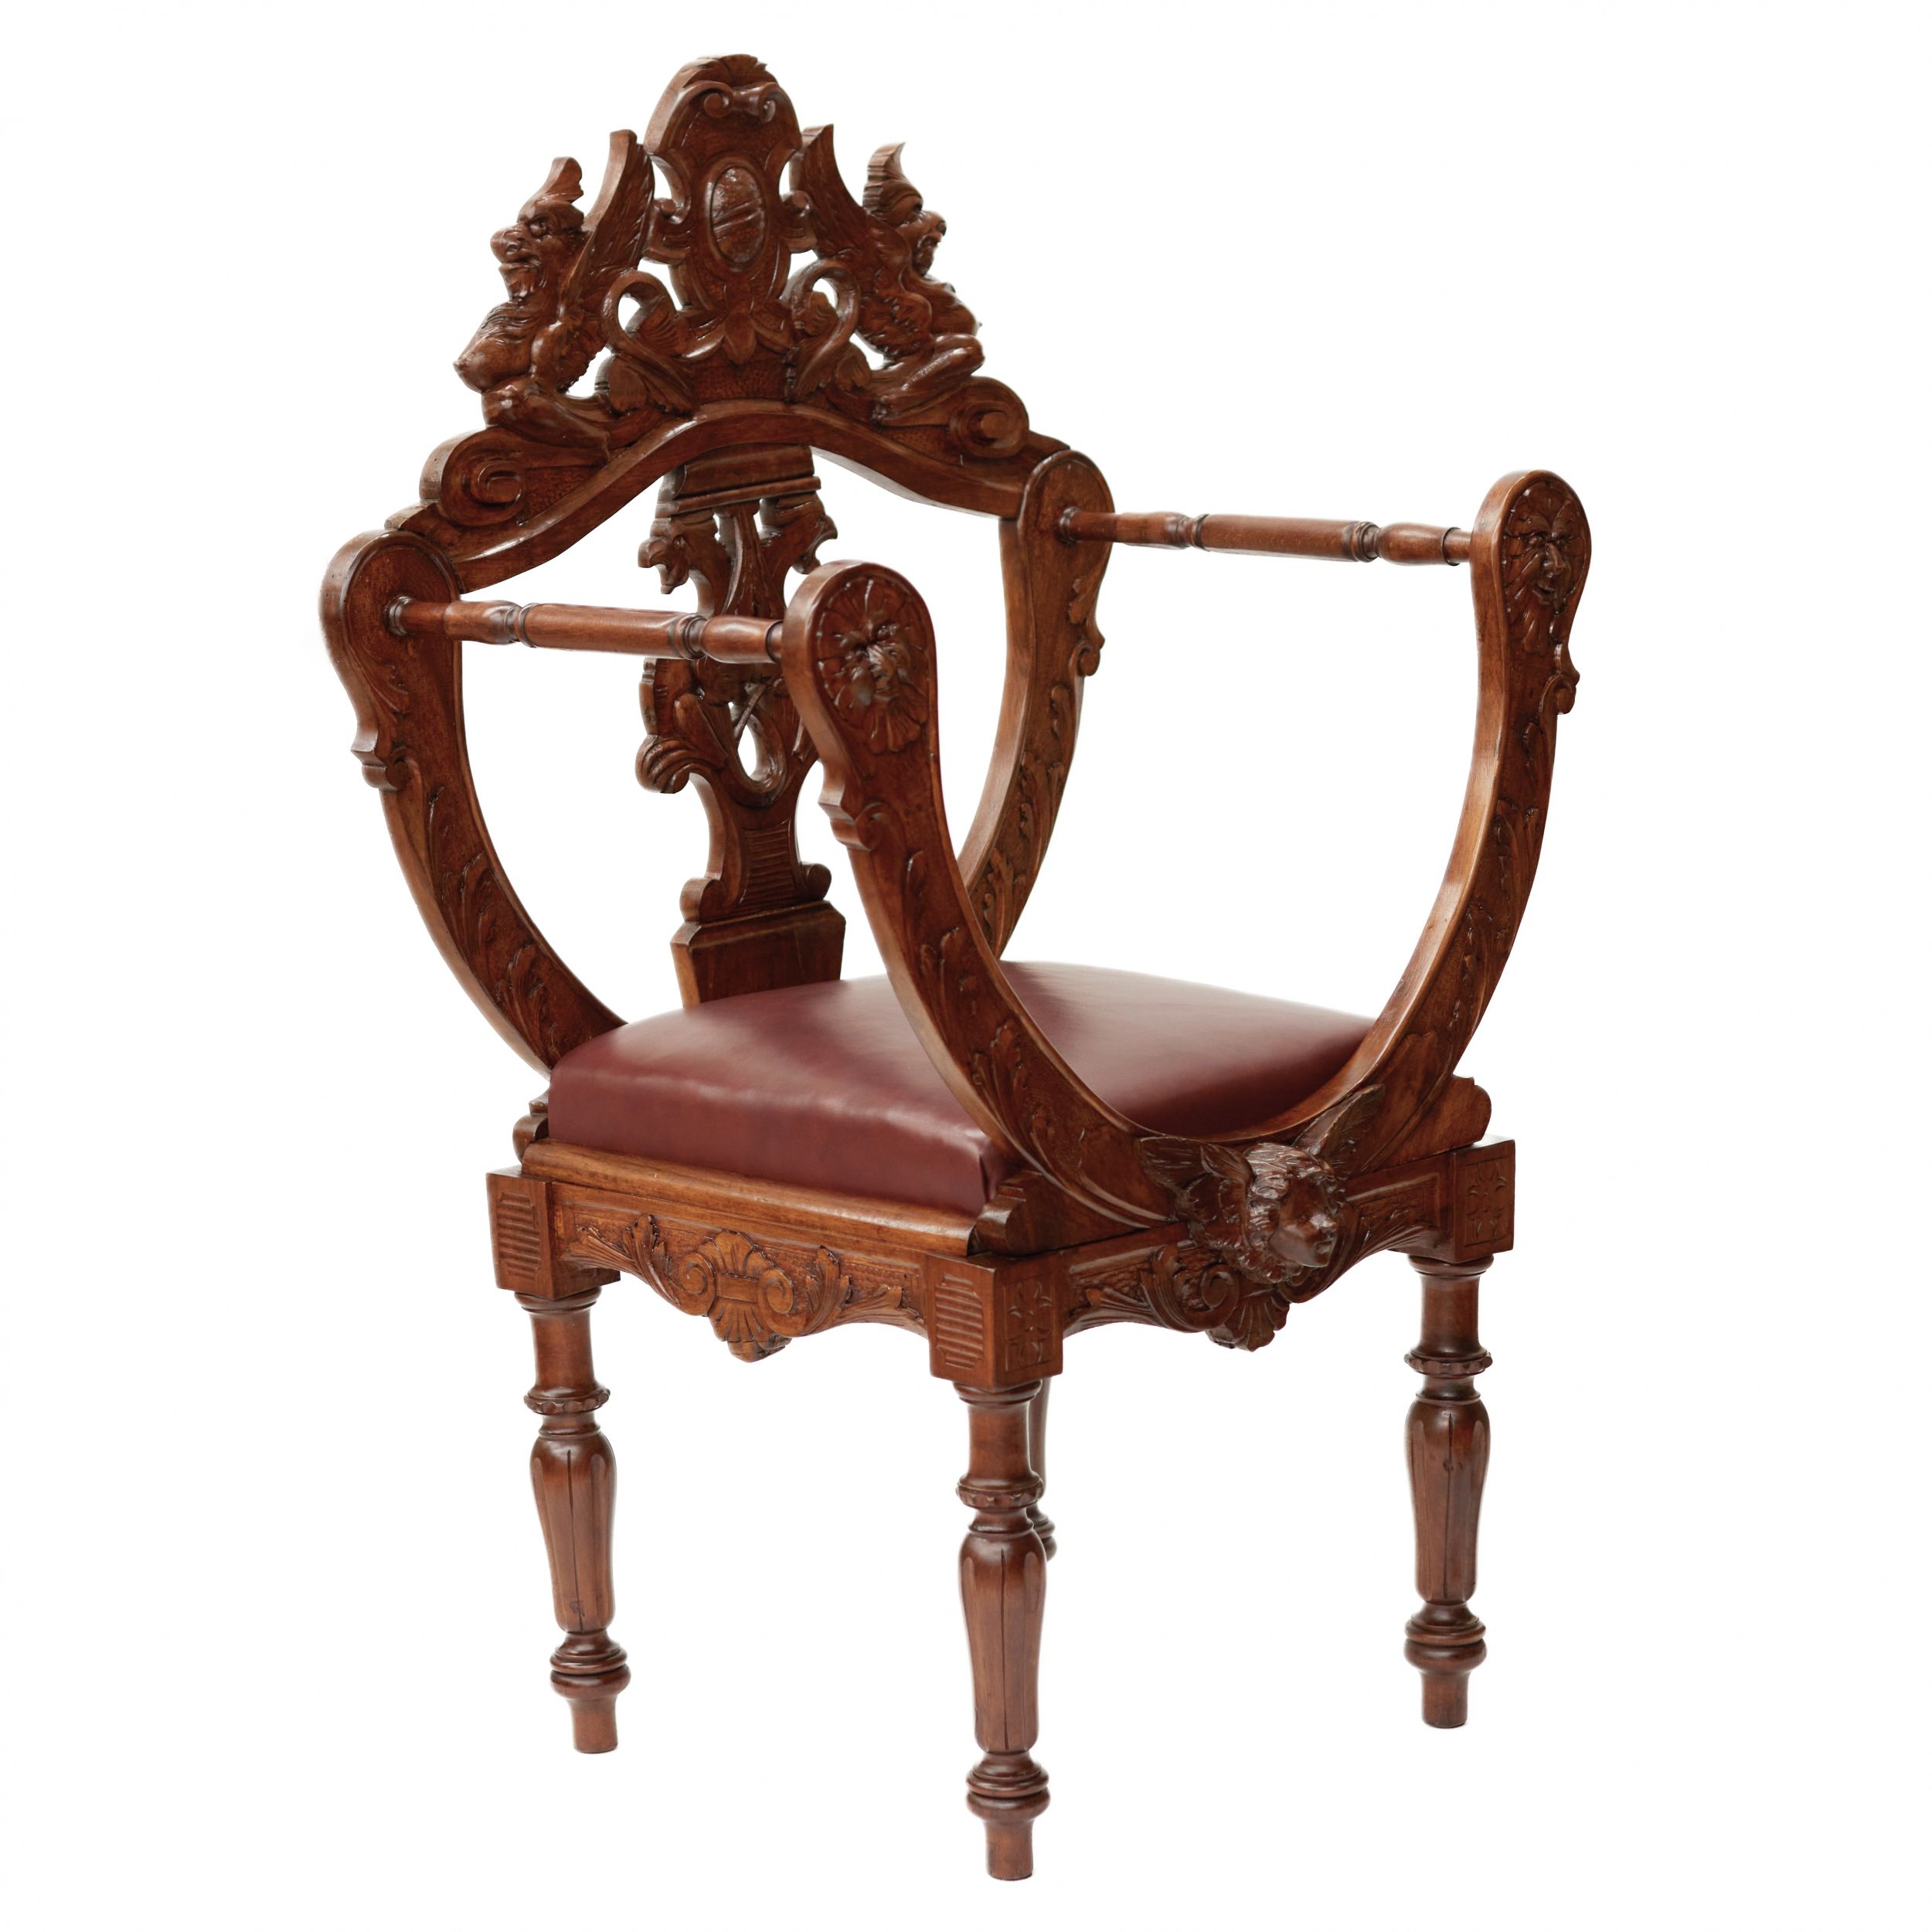 Carved, richly decorated walnut chair. 19th century - Image 3 of 6